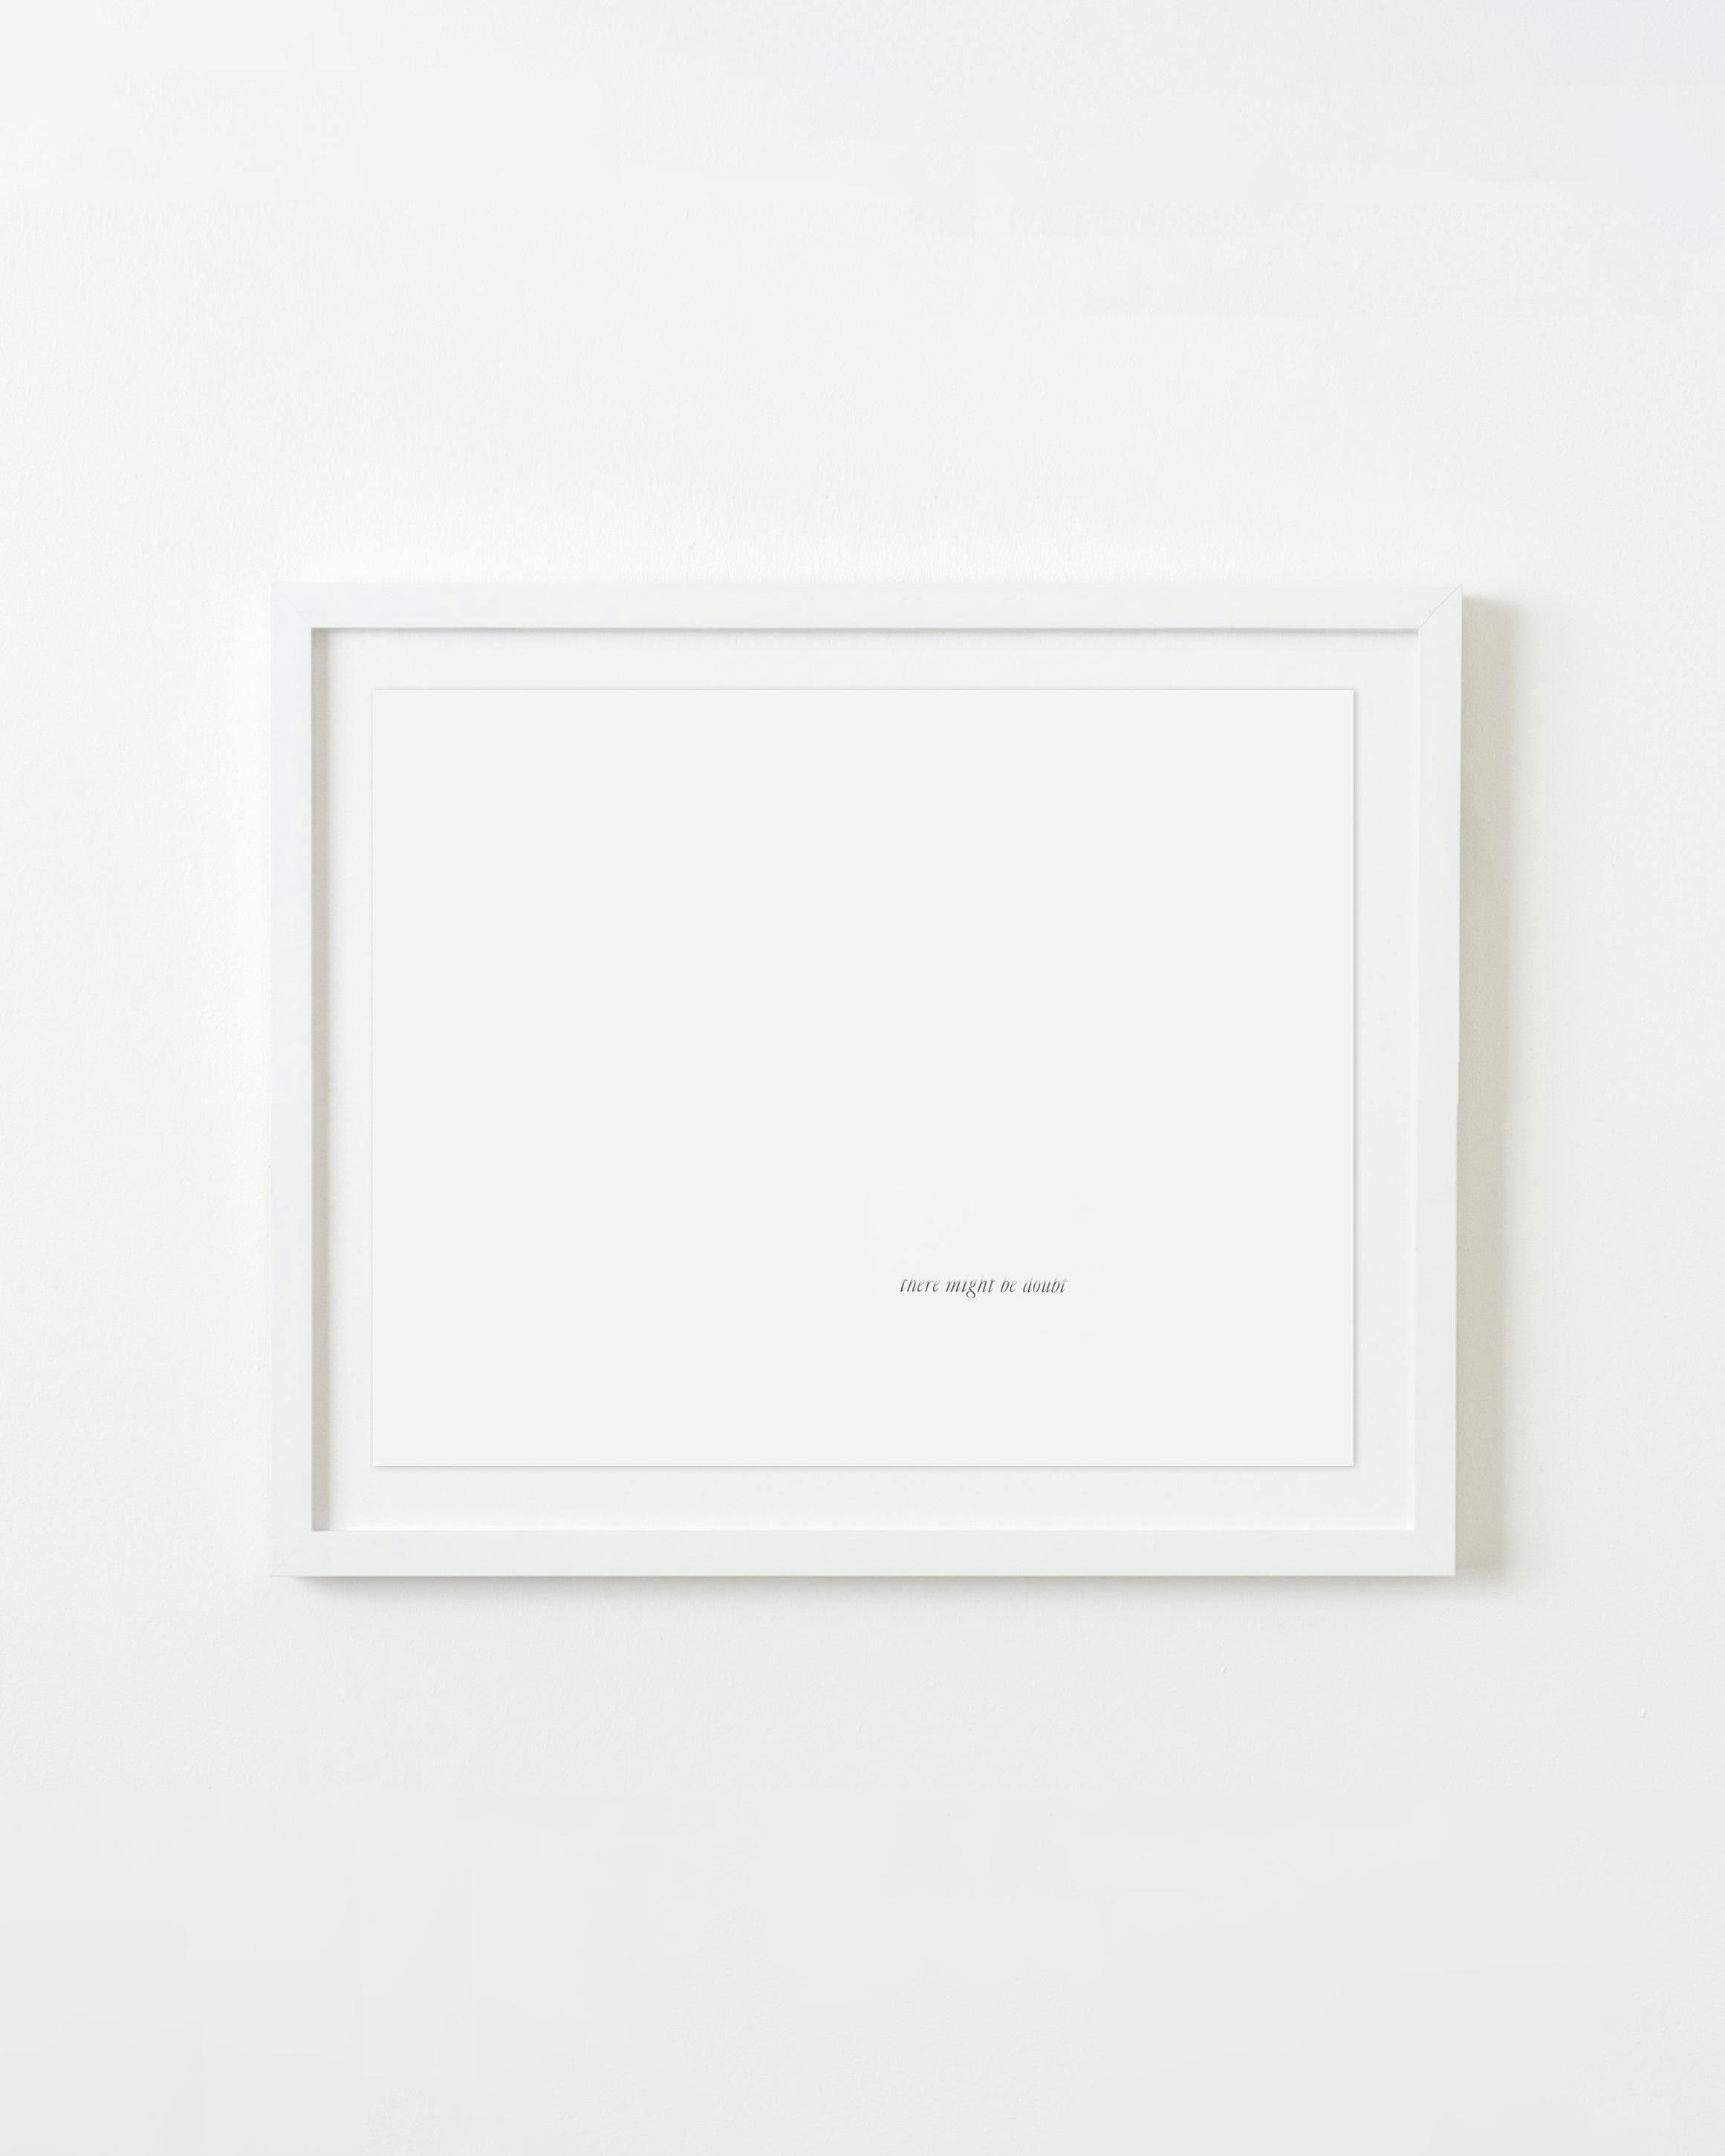 Print by Alyson Provax titled "Untitled (there might be doubt)".